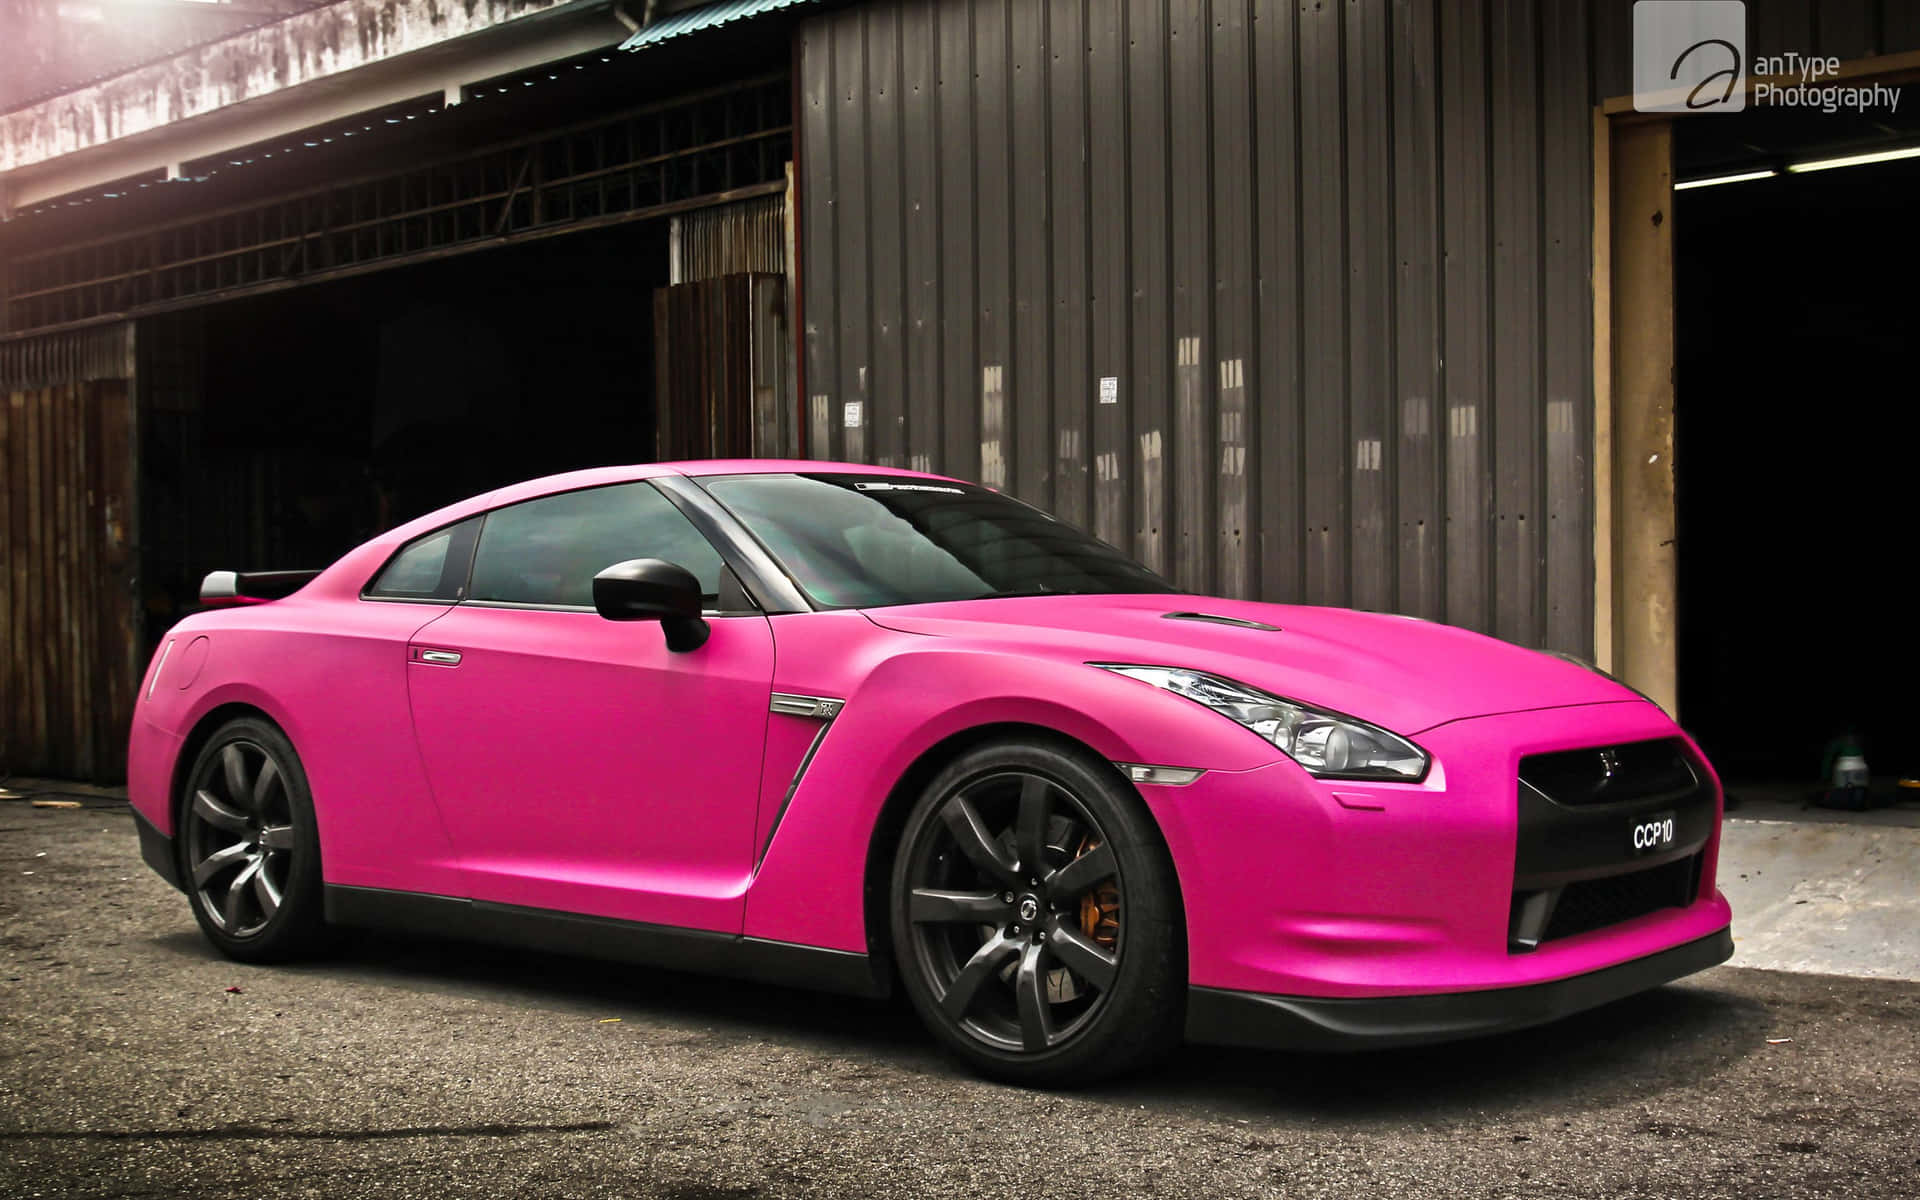 A Pink Nissan Gtr Parked In Front Of A Garage Wallpaper